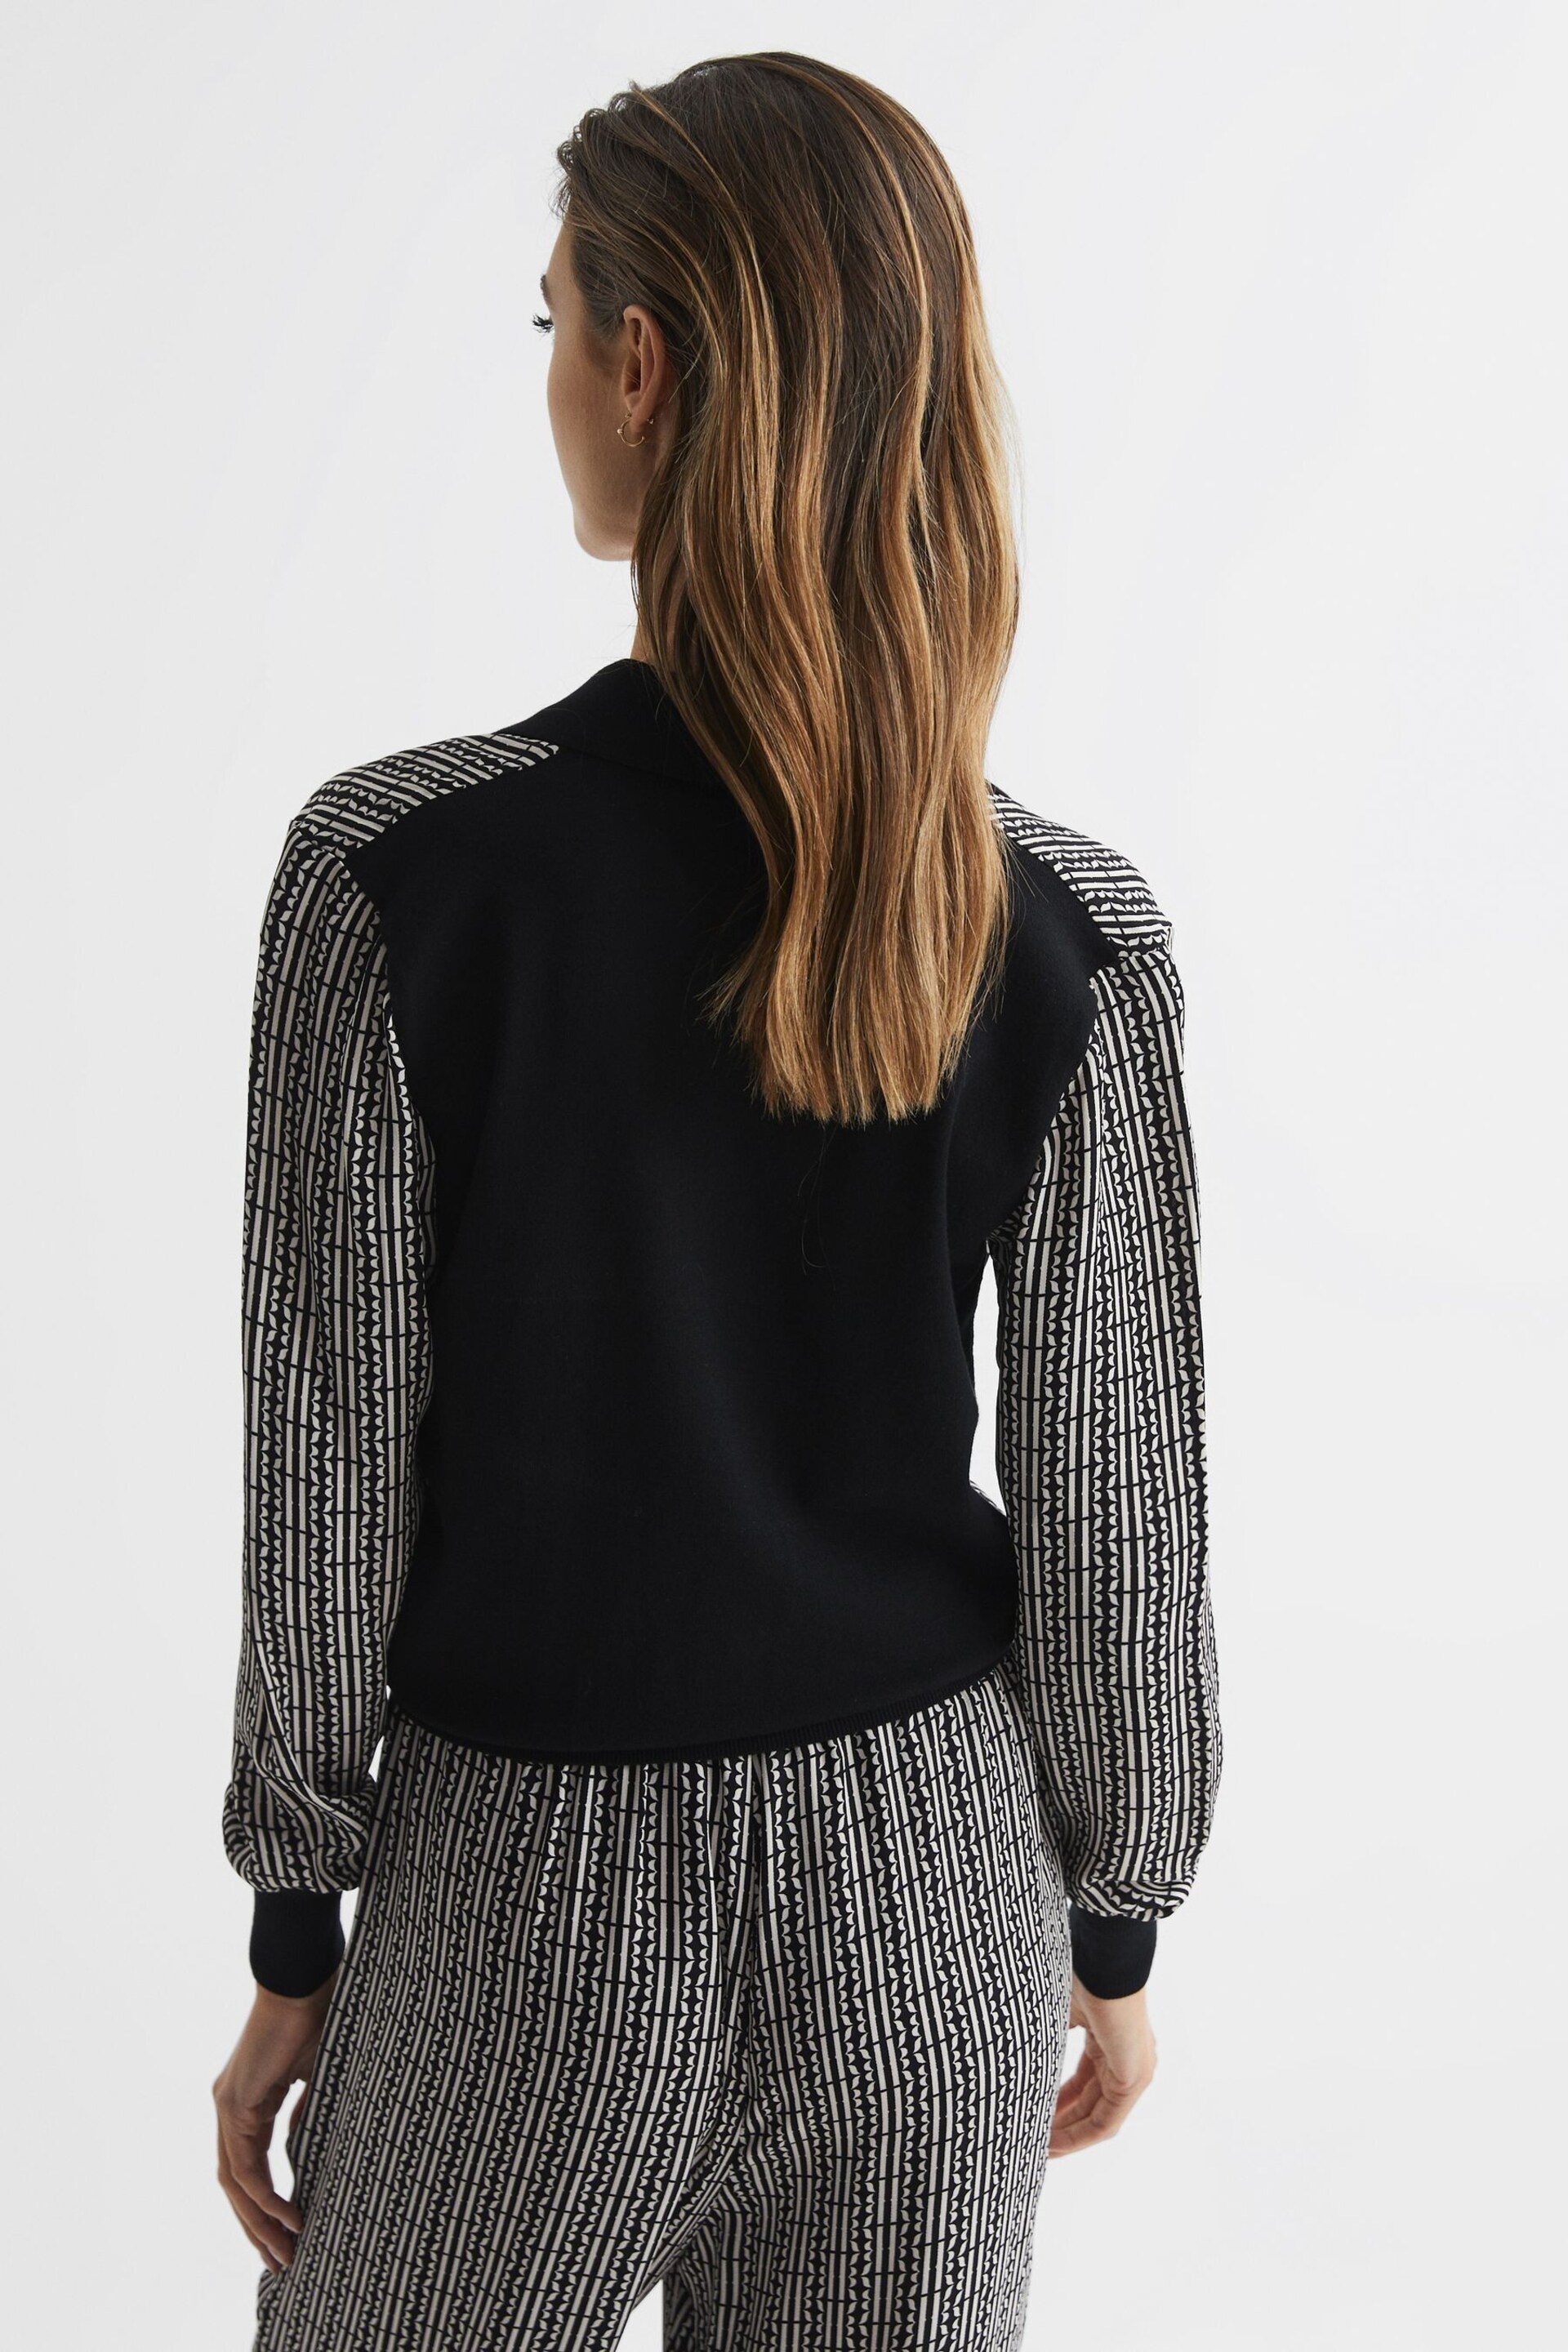 Reiss Black Olivia Printed Mix-Knitted Shirt - Image 5 of 7